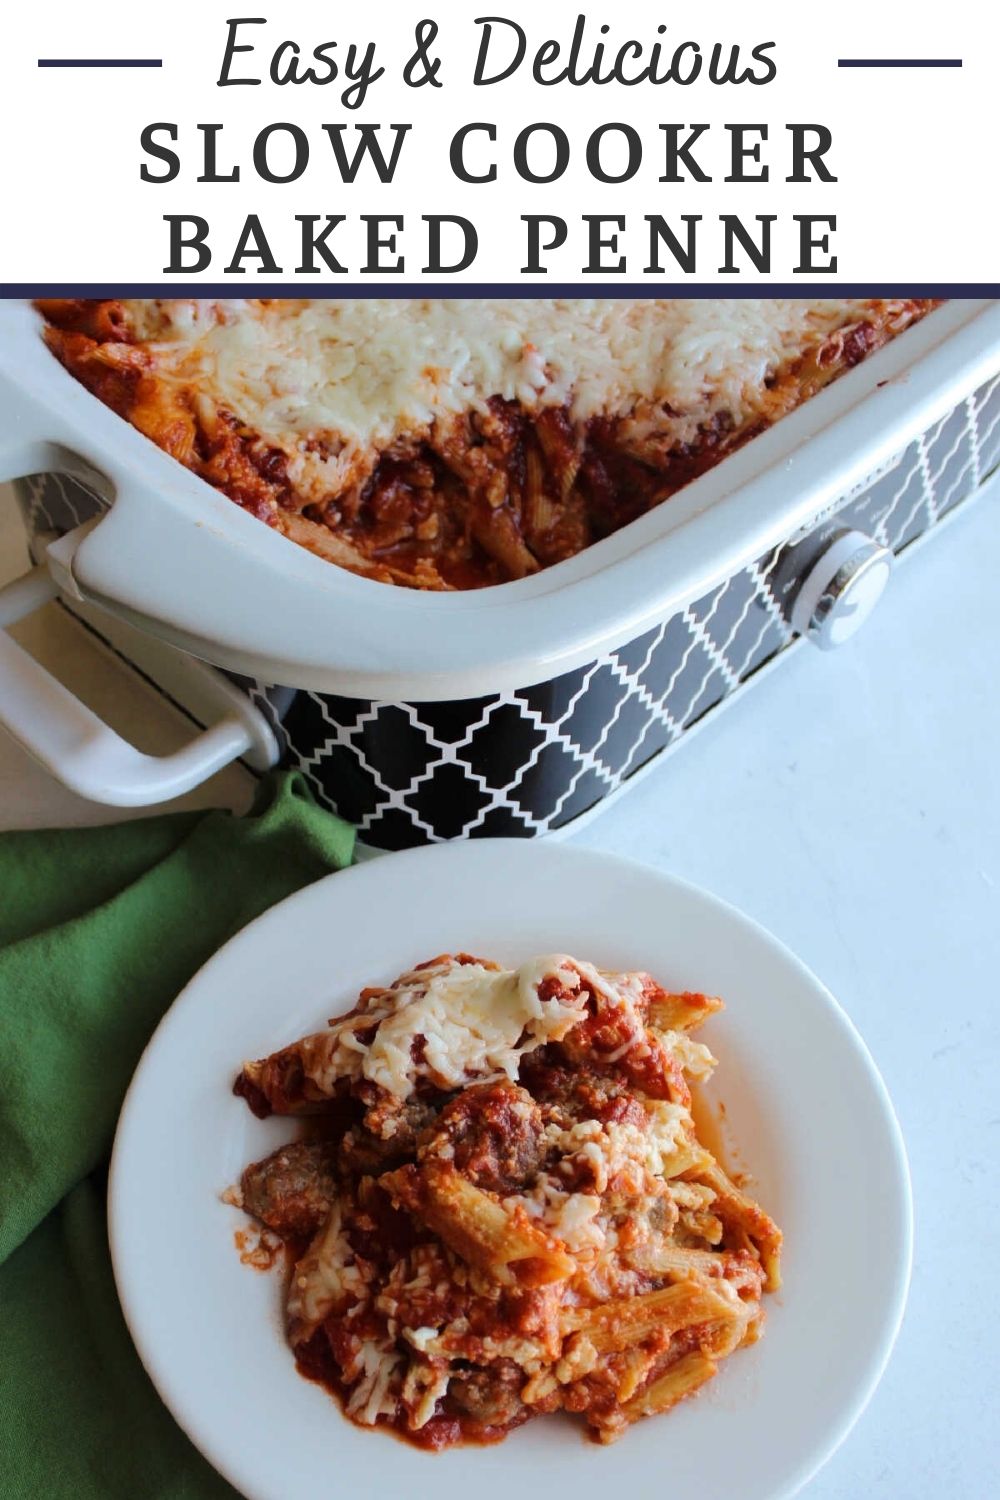 Slow cooker baked pasta is such an easy family friendly dinner idea. You don't even have to boil the boil the pasta first, just layer it in and let it cook to cheesy perfection.